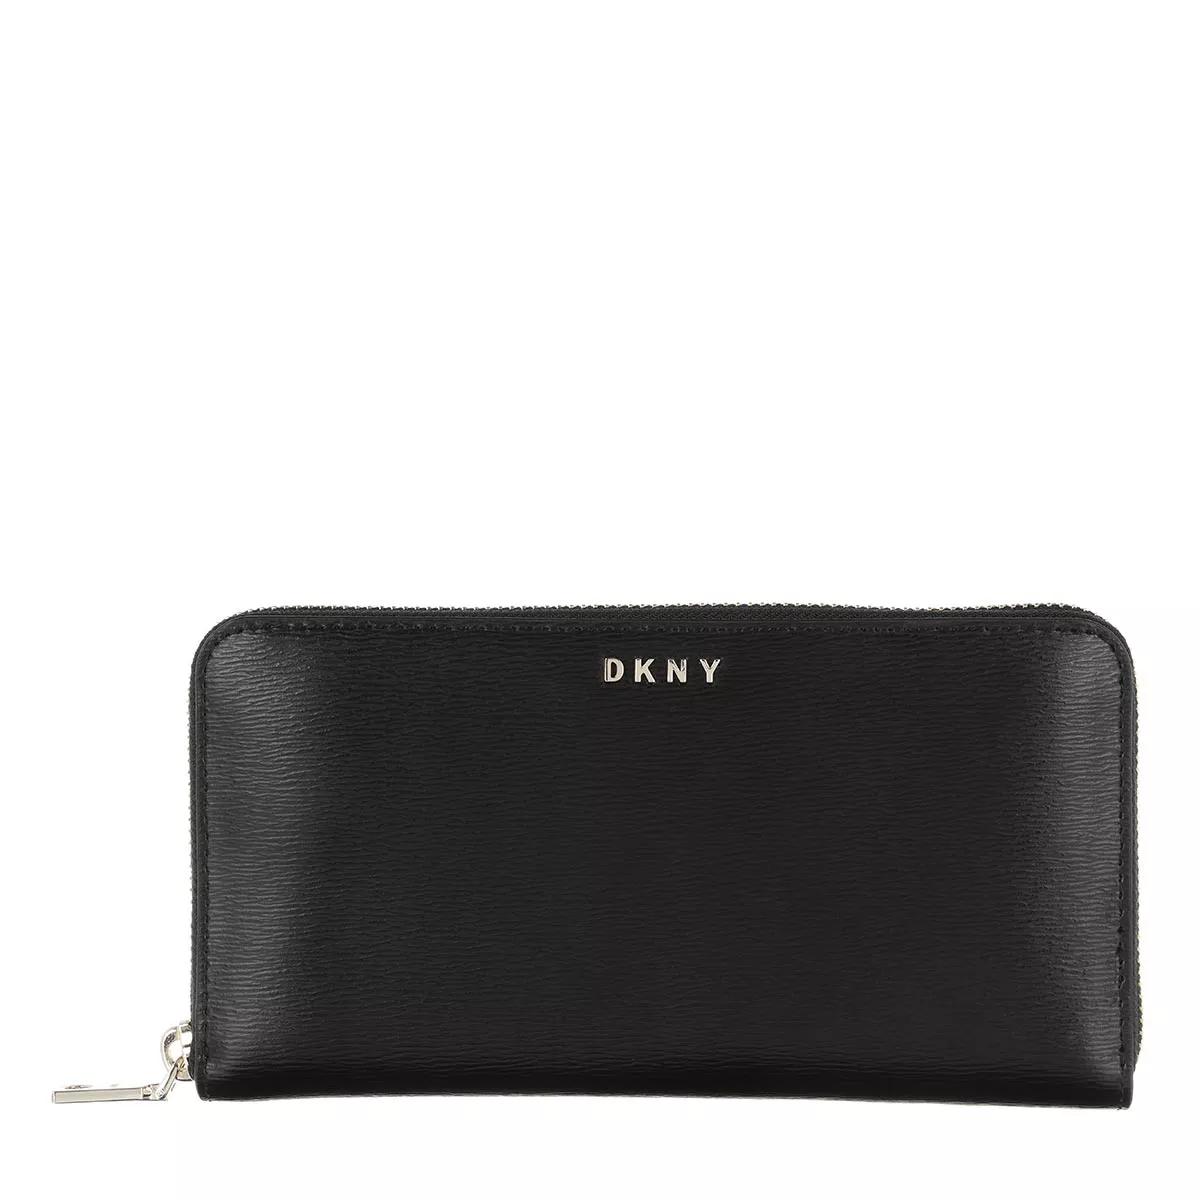 Dkny Bryant Park Saffiano Large Carryall Wallet In Dk Charcoal